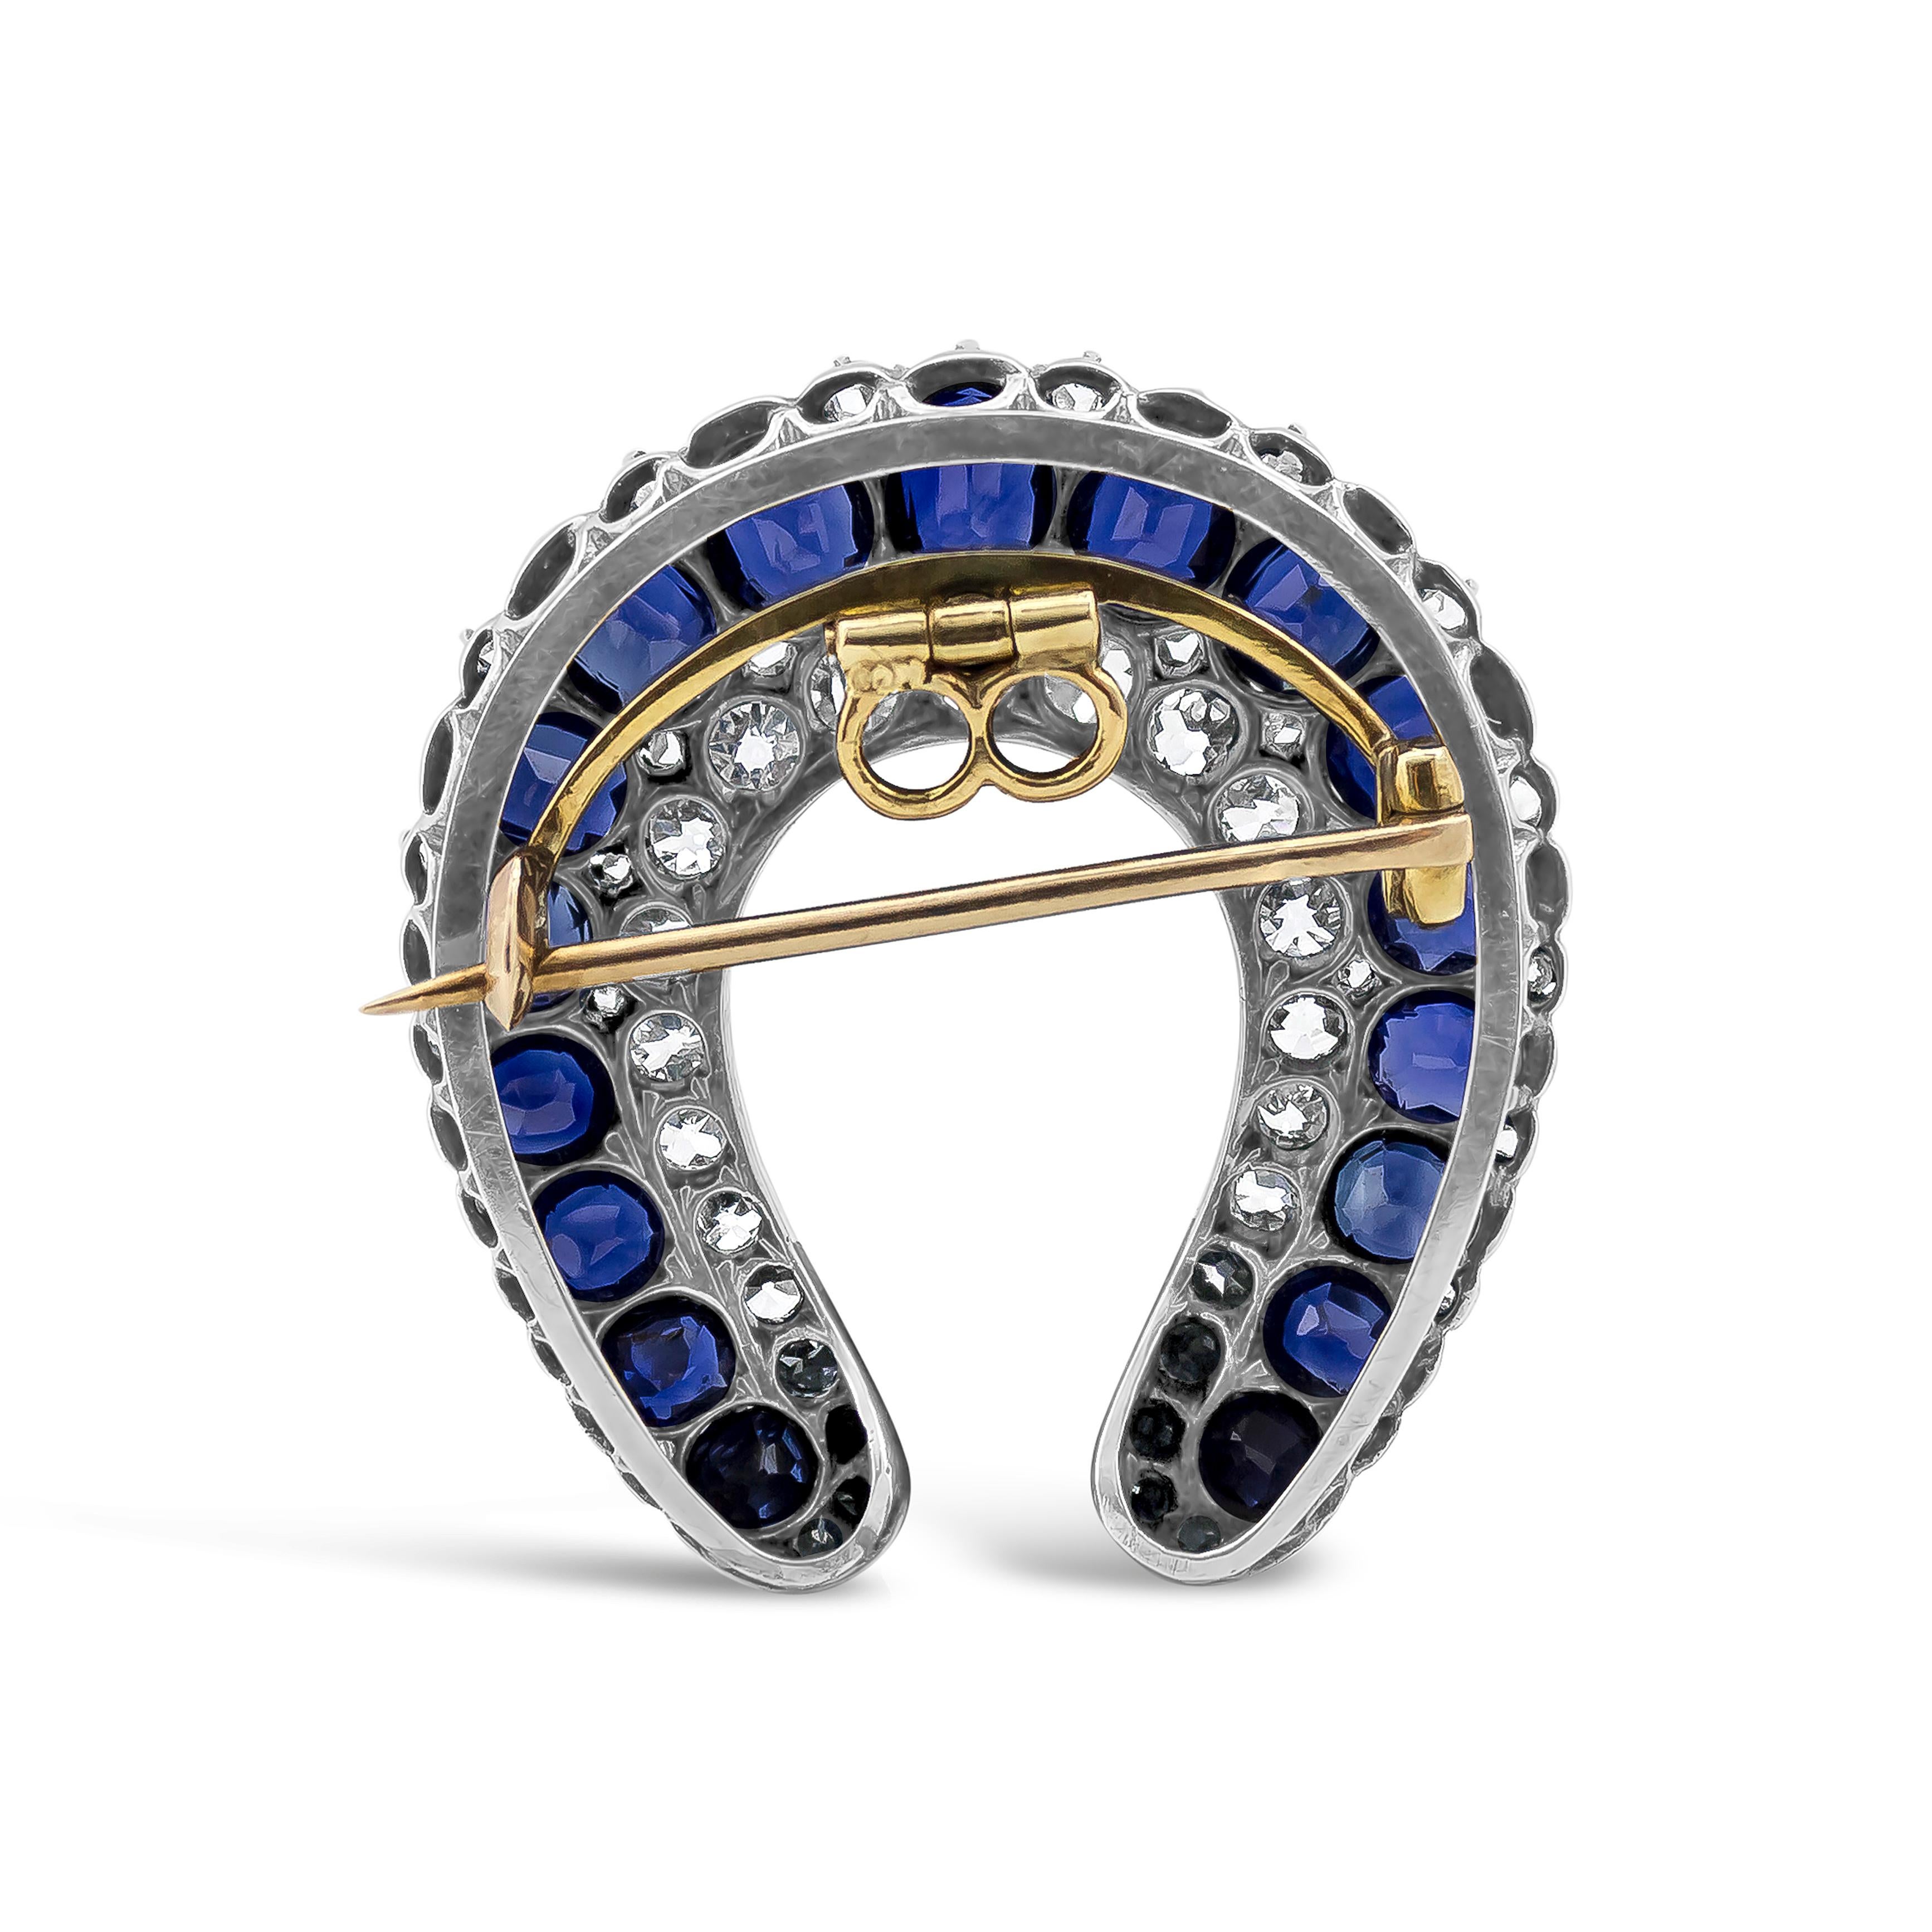 Antique brooch showcasing 10.00 carats total of graduating oval cut blue sapphires, accented with old mine cut diamonds weighing 3.00 carats total. Natural No-Heat.



